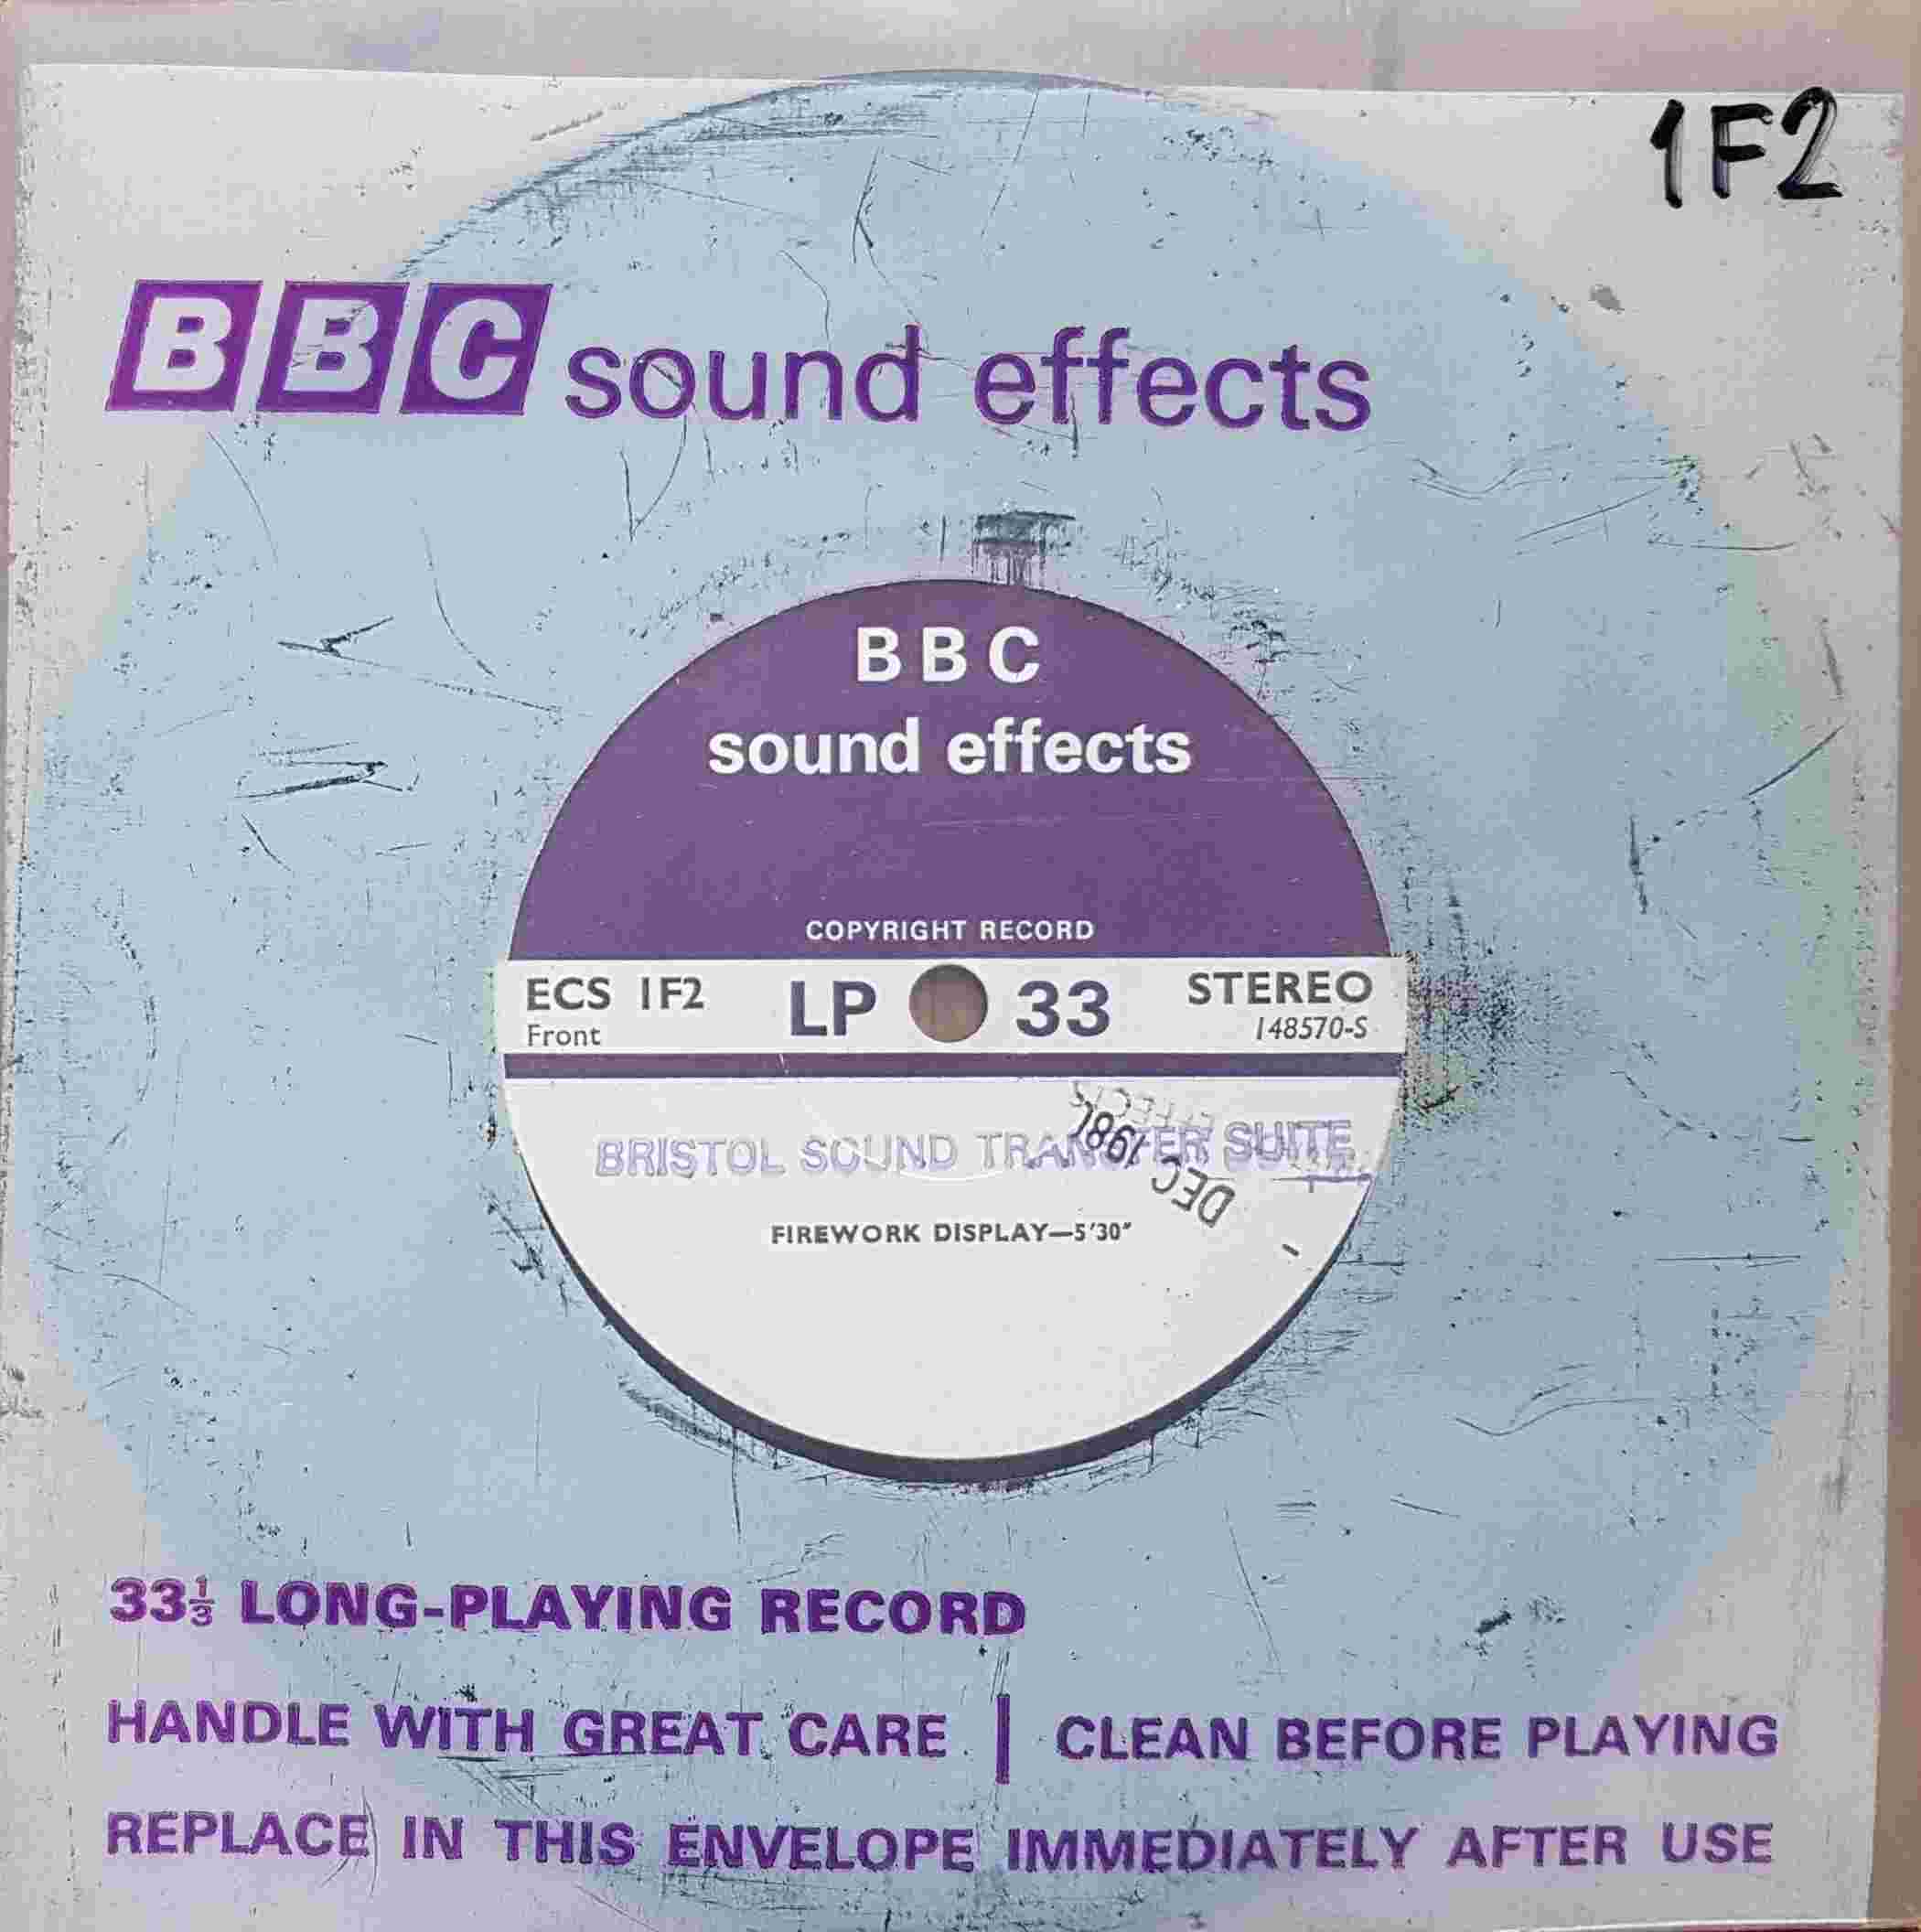 Picture of ECS 1F2 Firework display / Bonfire by artist Not registered from the BBC singles - Records and Tapes library